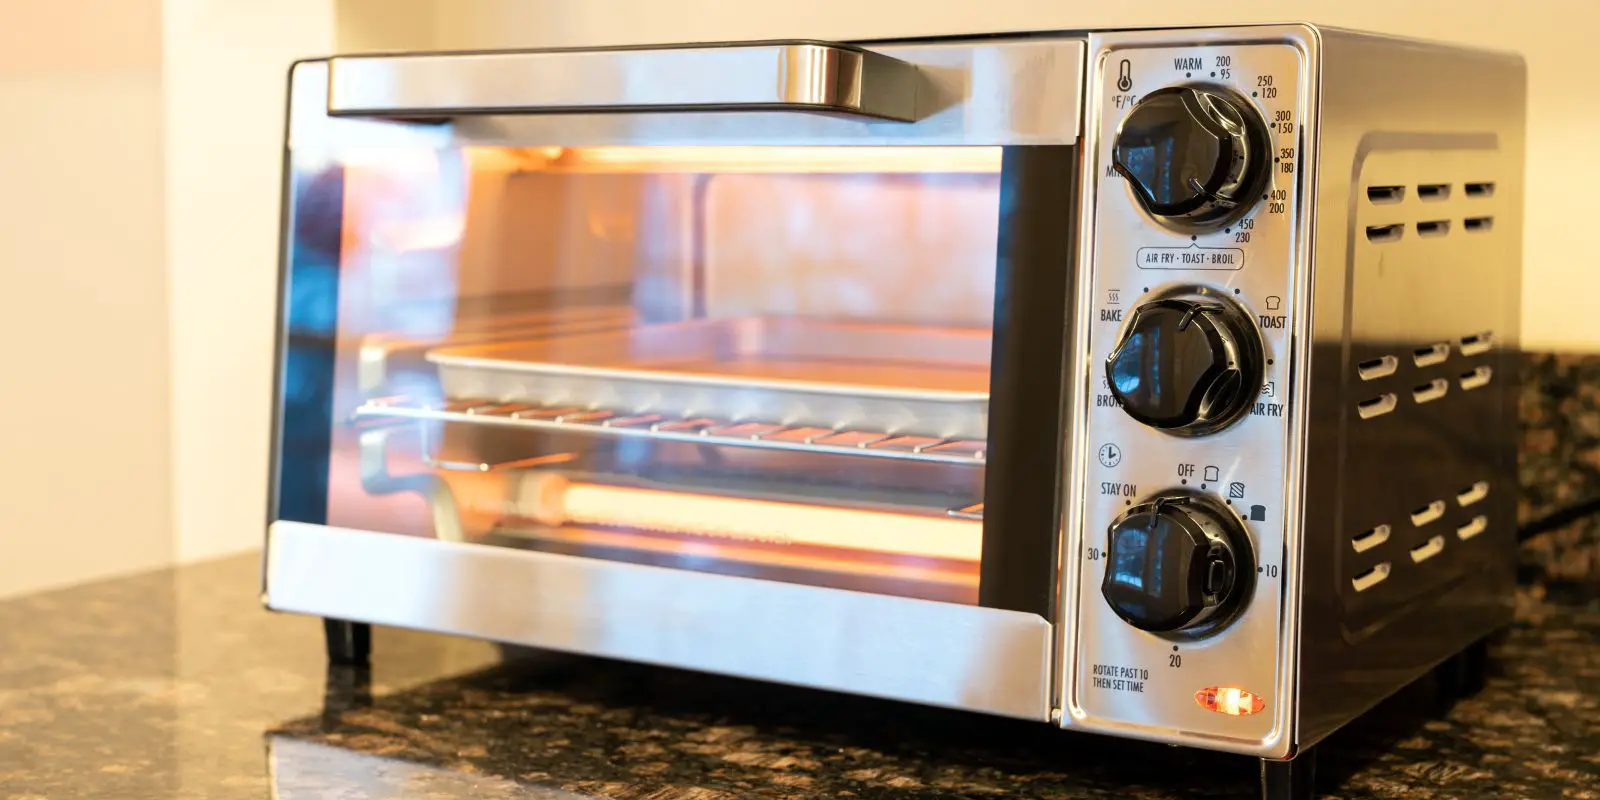 How Does A Toaster Oven Work?